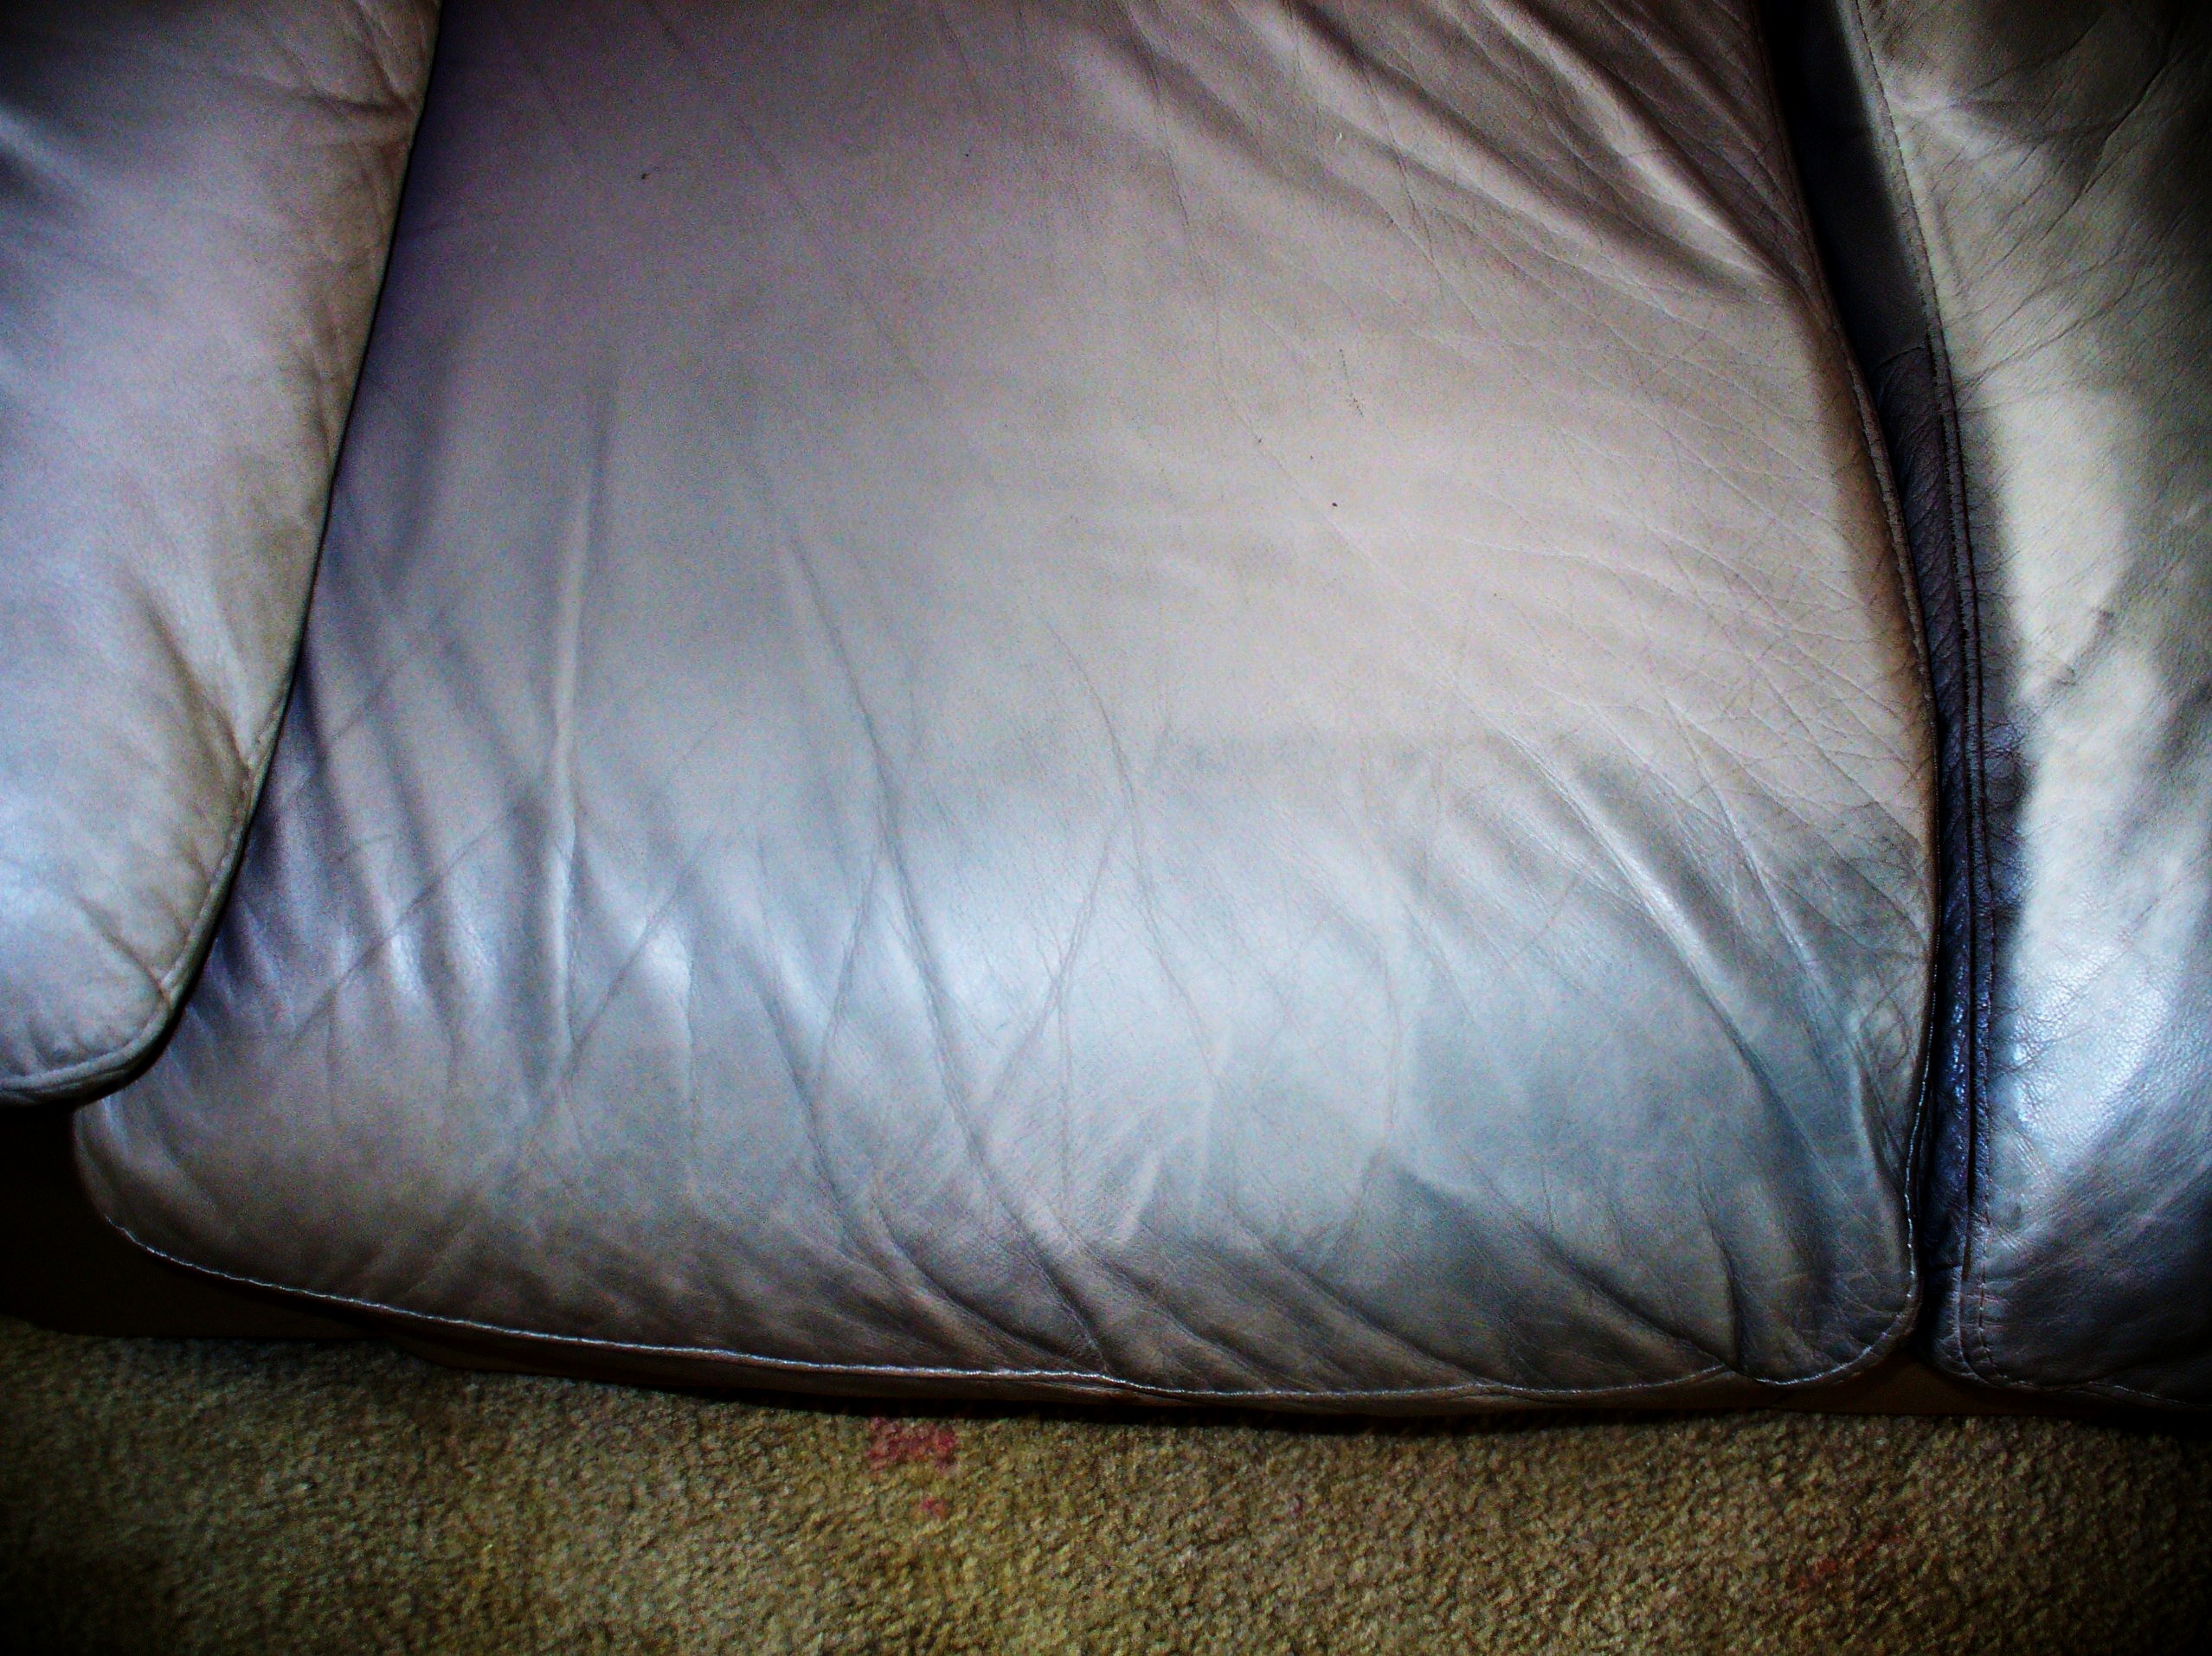 Leather Cleaning Dyeing Repair, Leather Furniture Repair Orlando